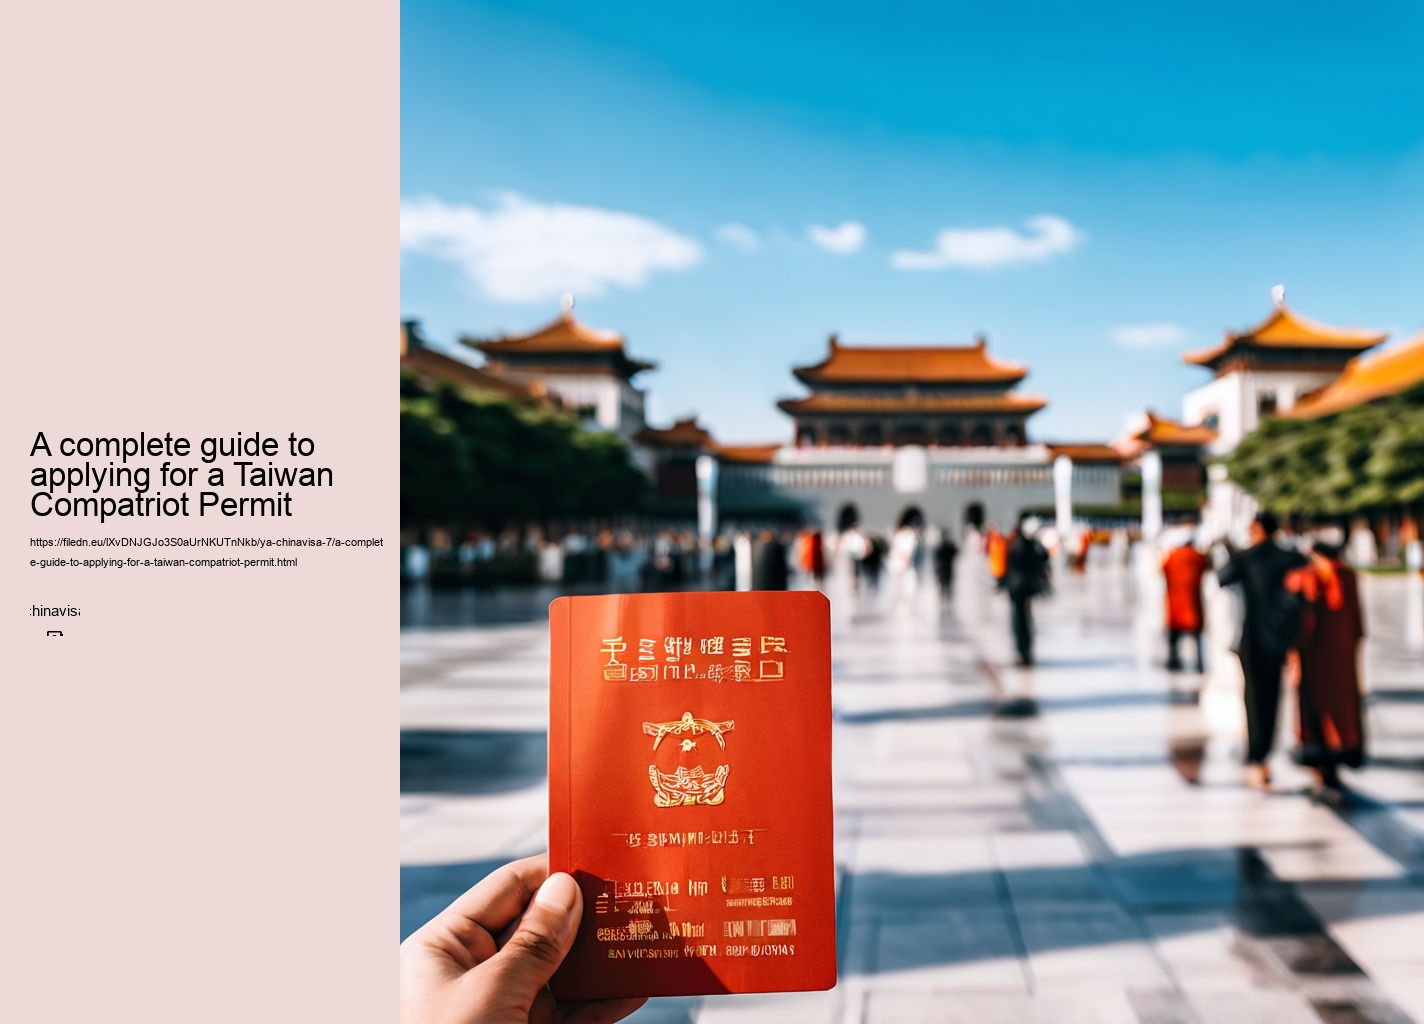 A complete guide to applying for a Taiwan Compatriot Permit